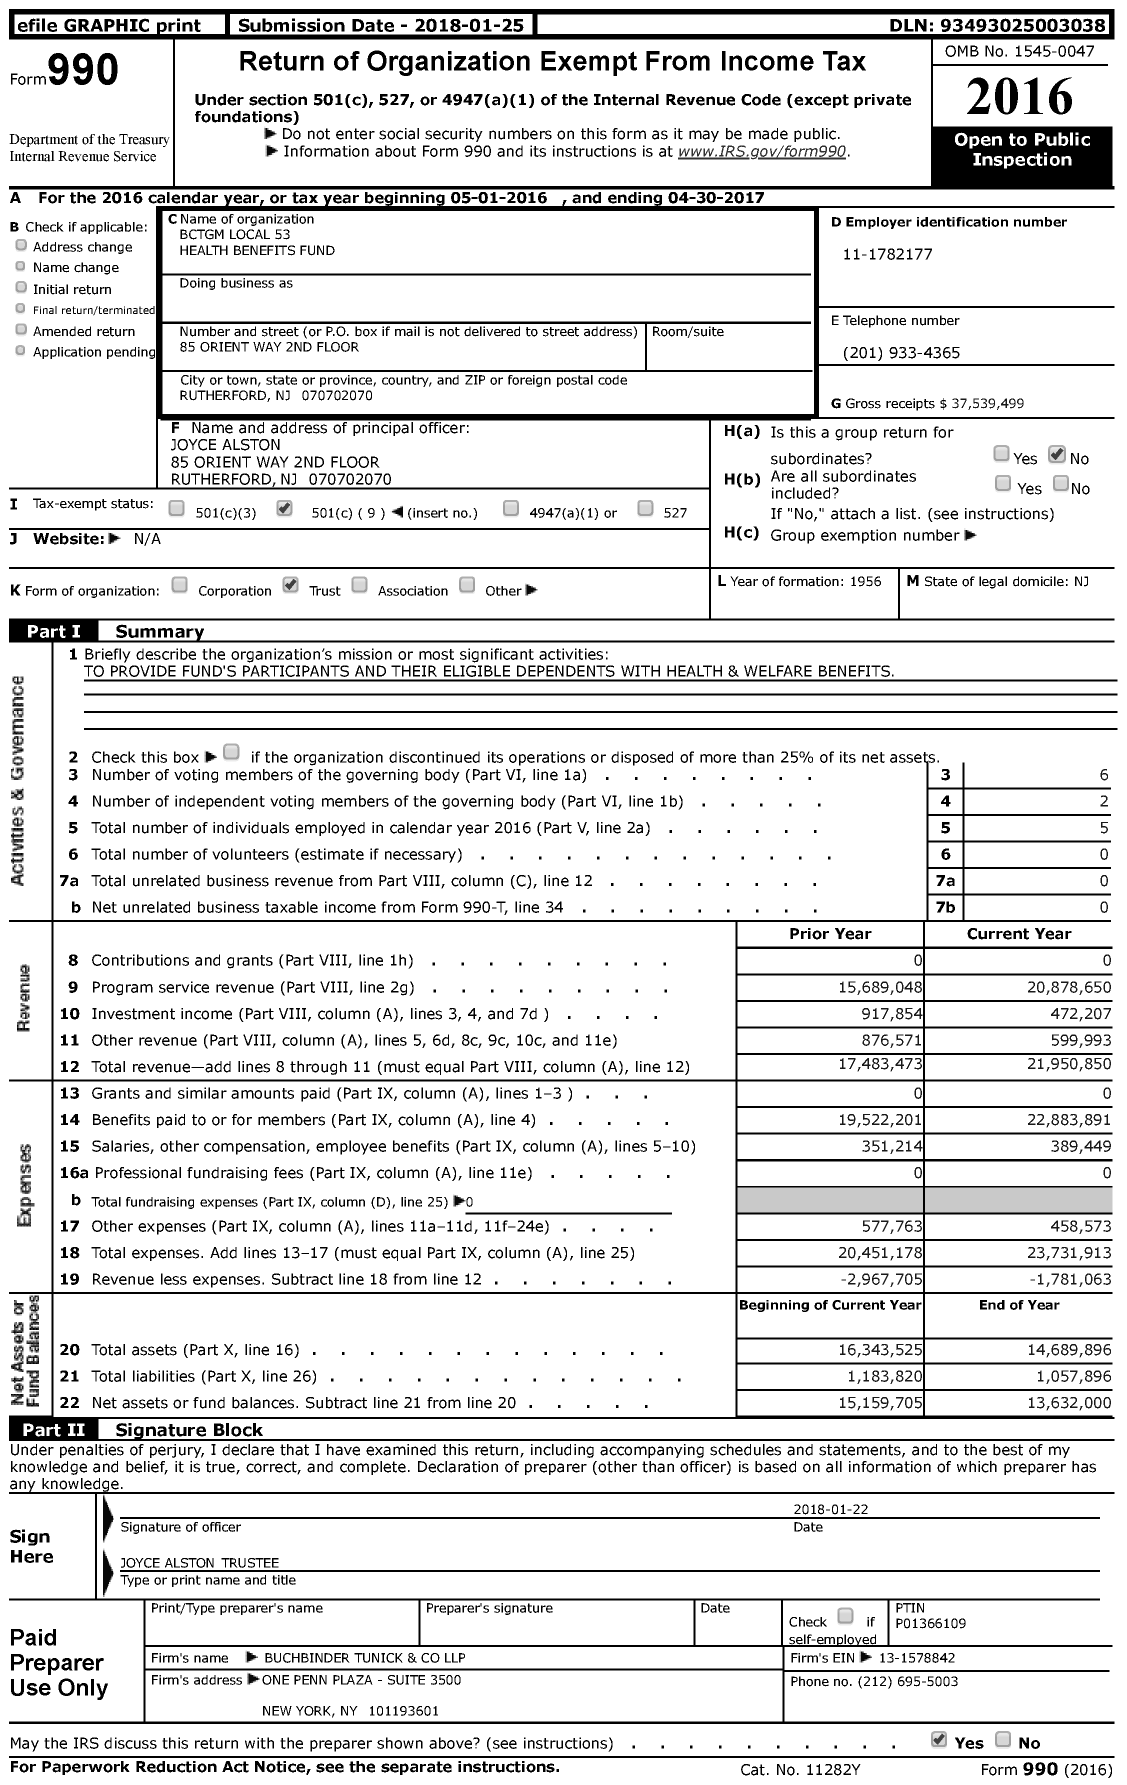 Image of first page of 2016 Form 990 for BCTGM Local 53 Health Benefits Fund